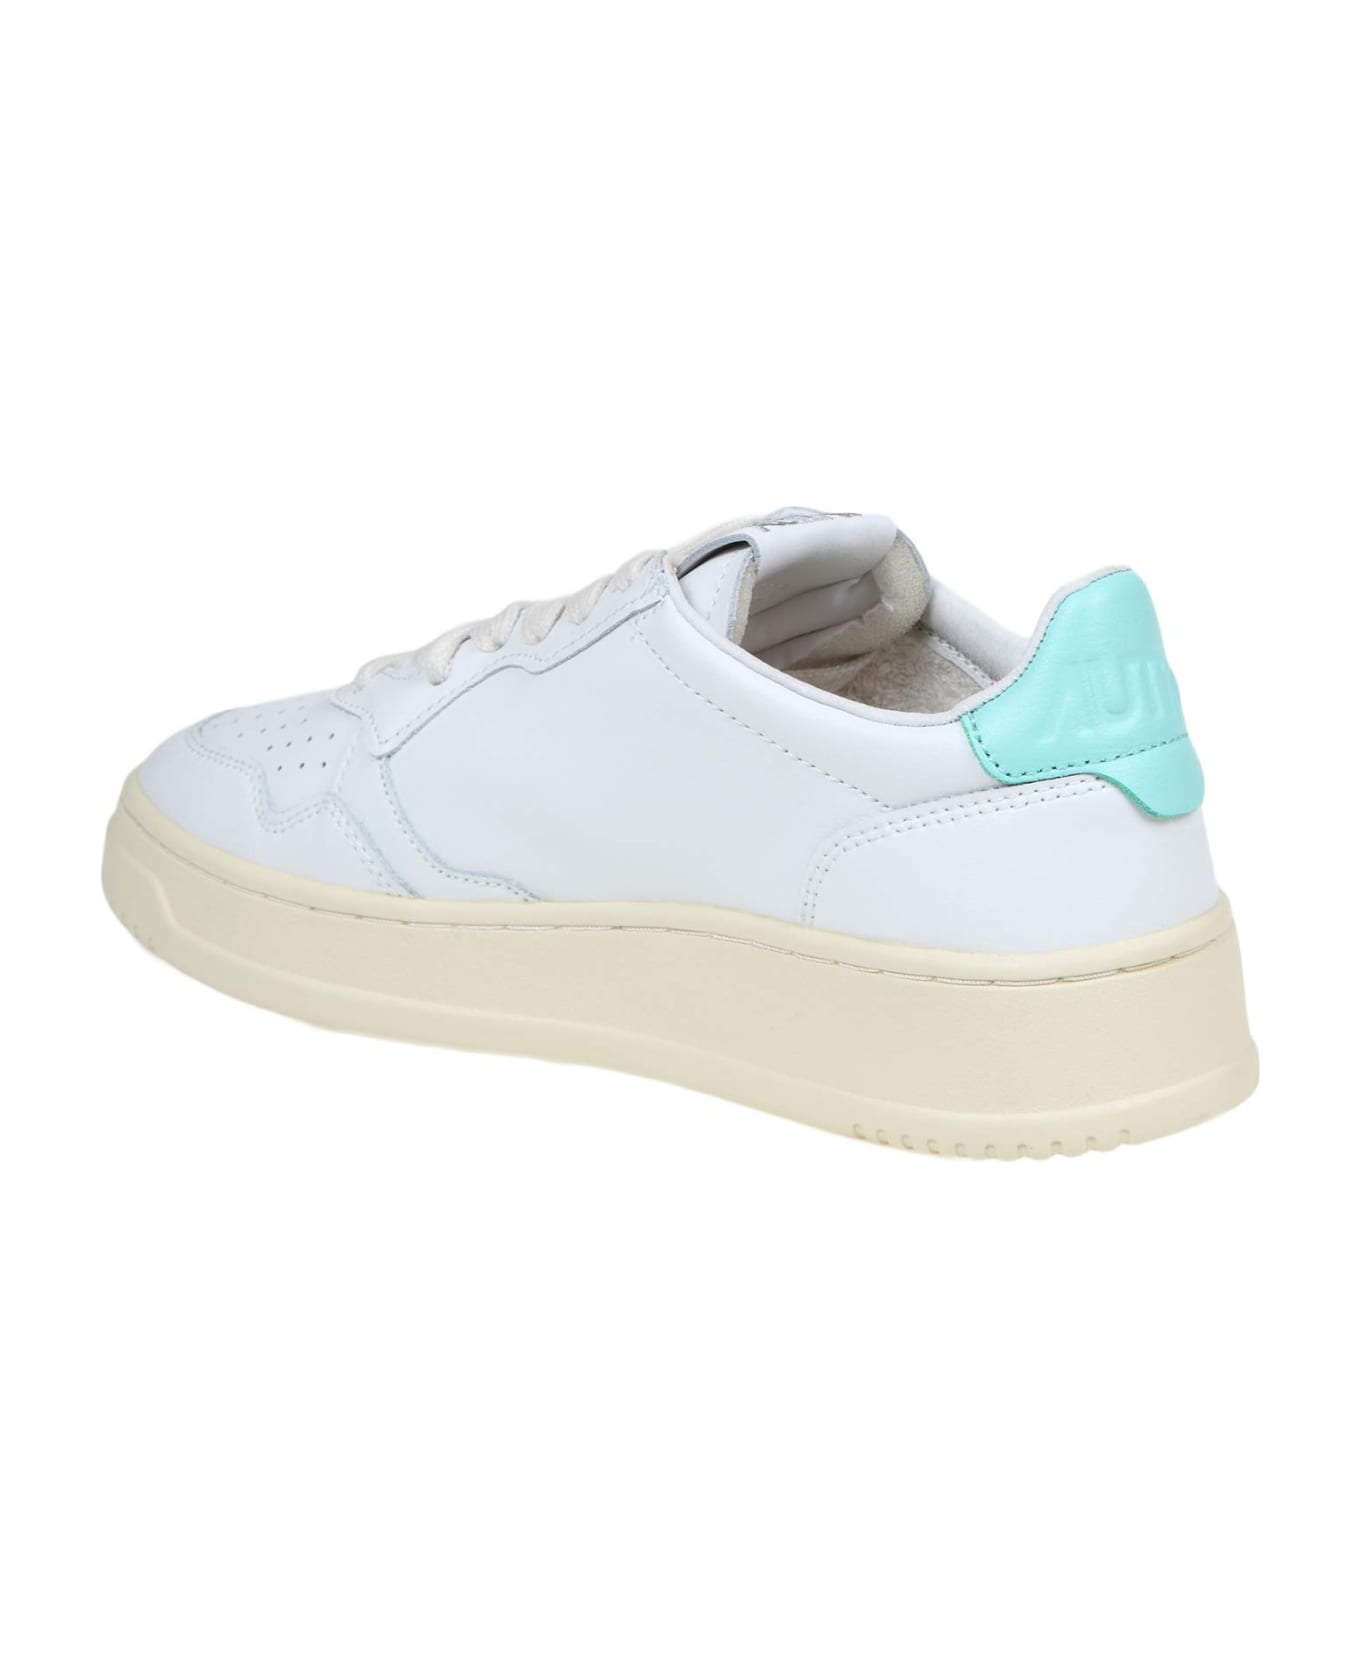 Autry 01 Sneakers In White Leather - white/turquoise